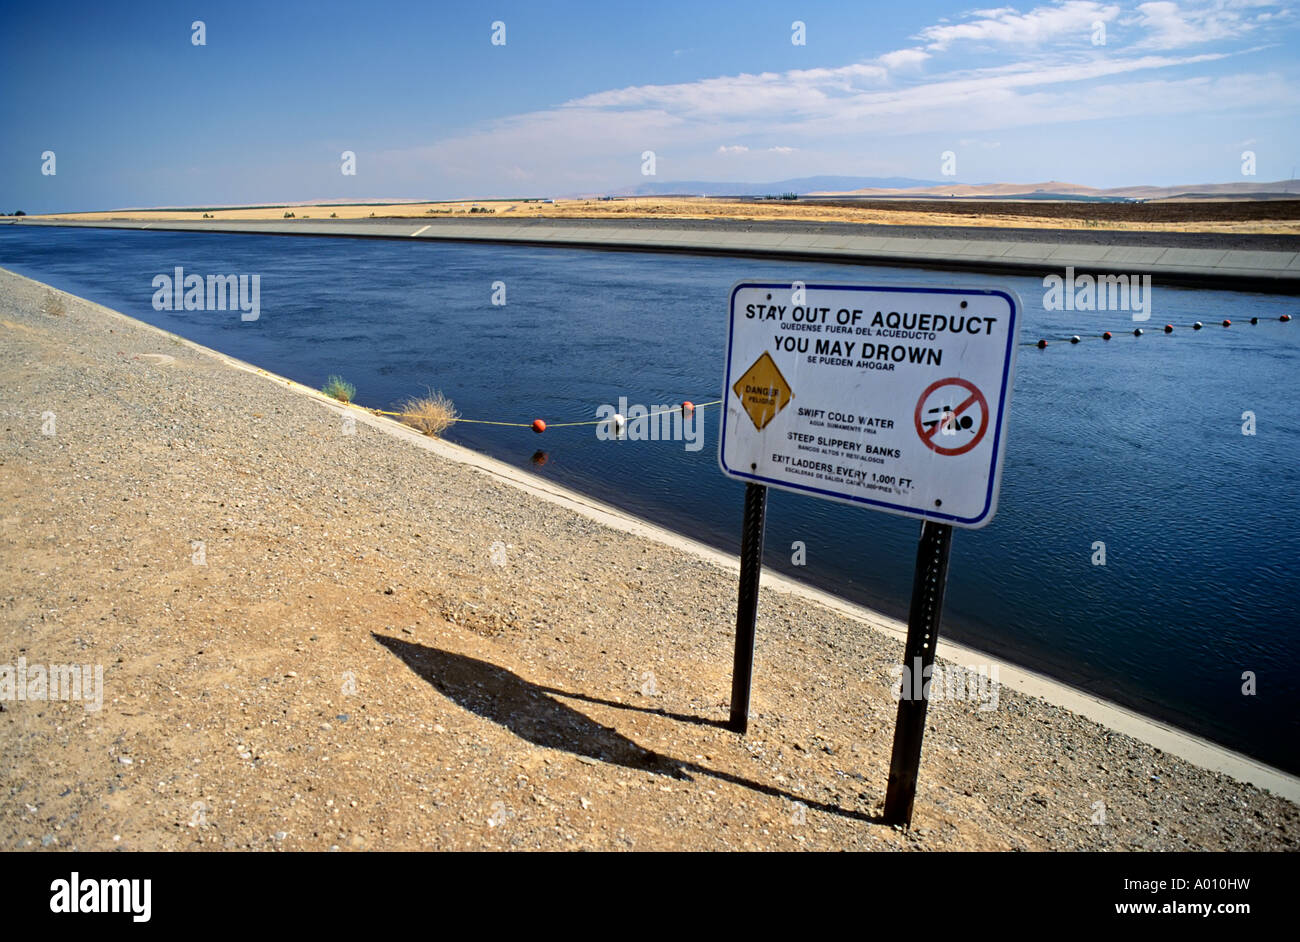 Stay out of aqueduct danger you may drown sign on California Aqueduct near Los Banos California USA Stock Photo